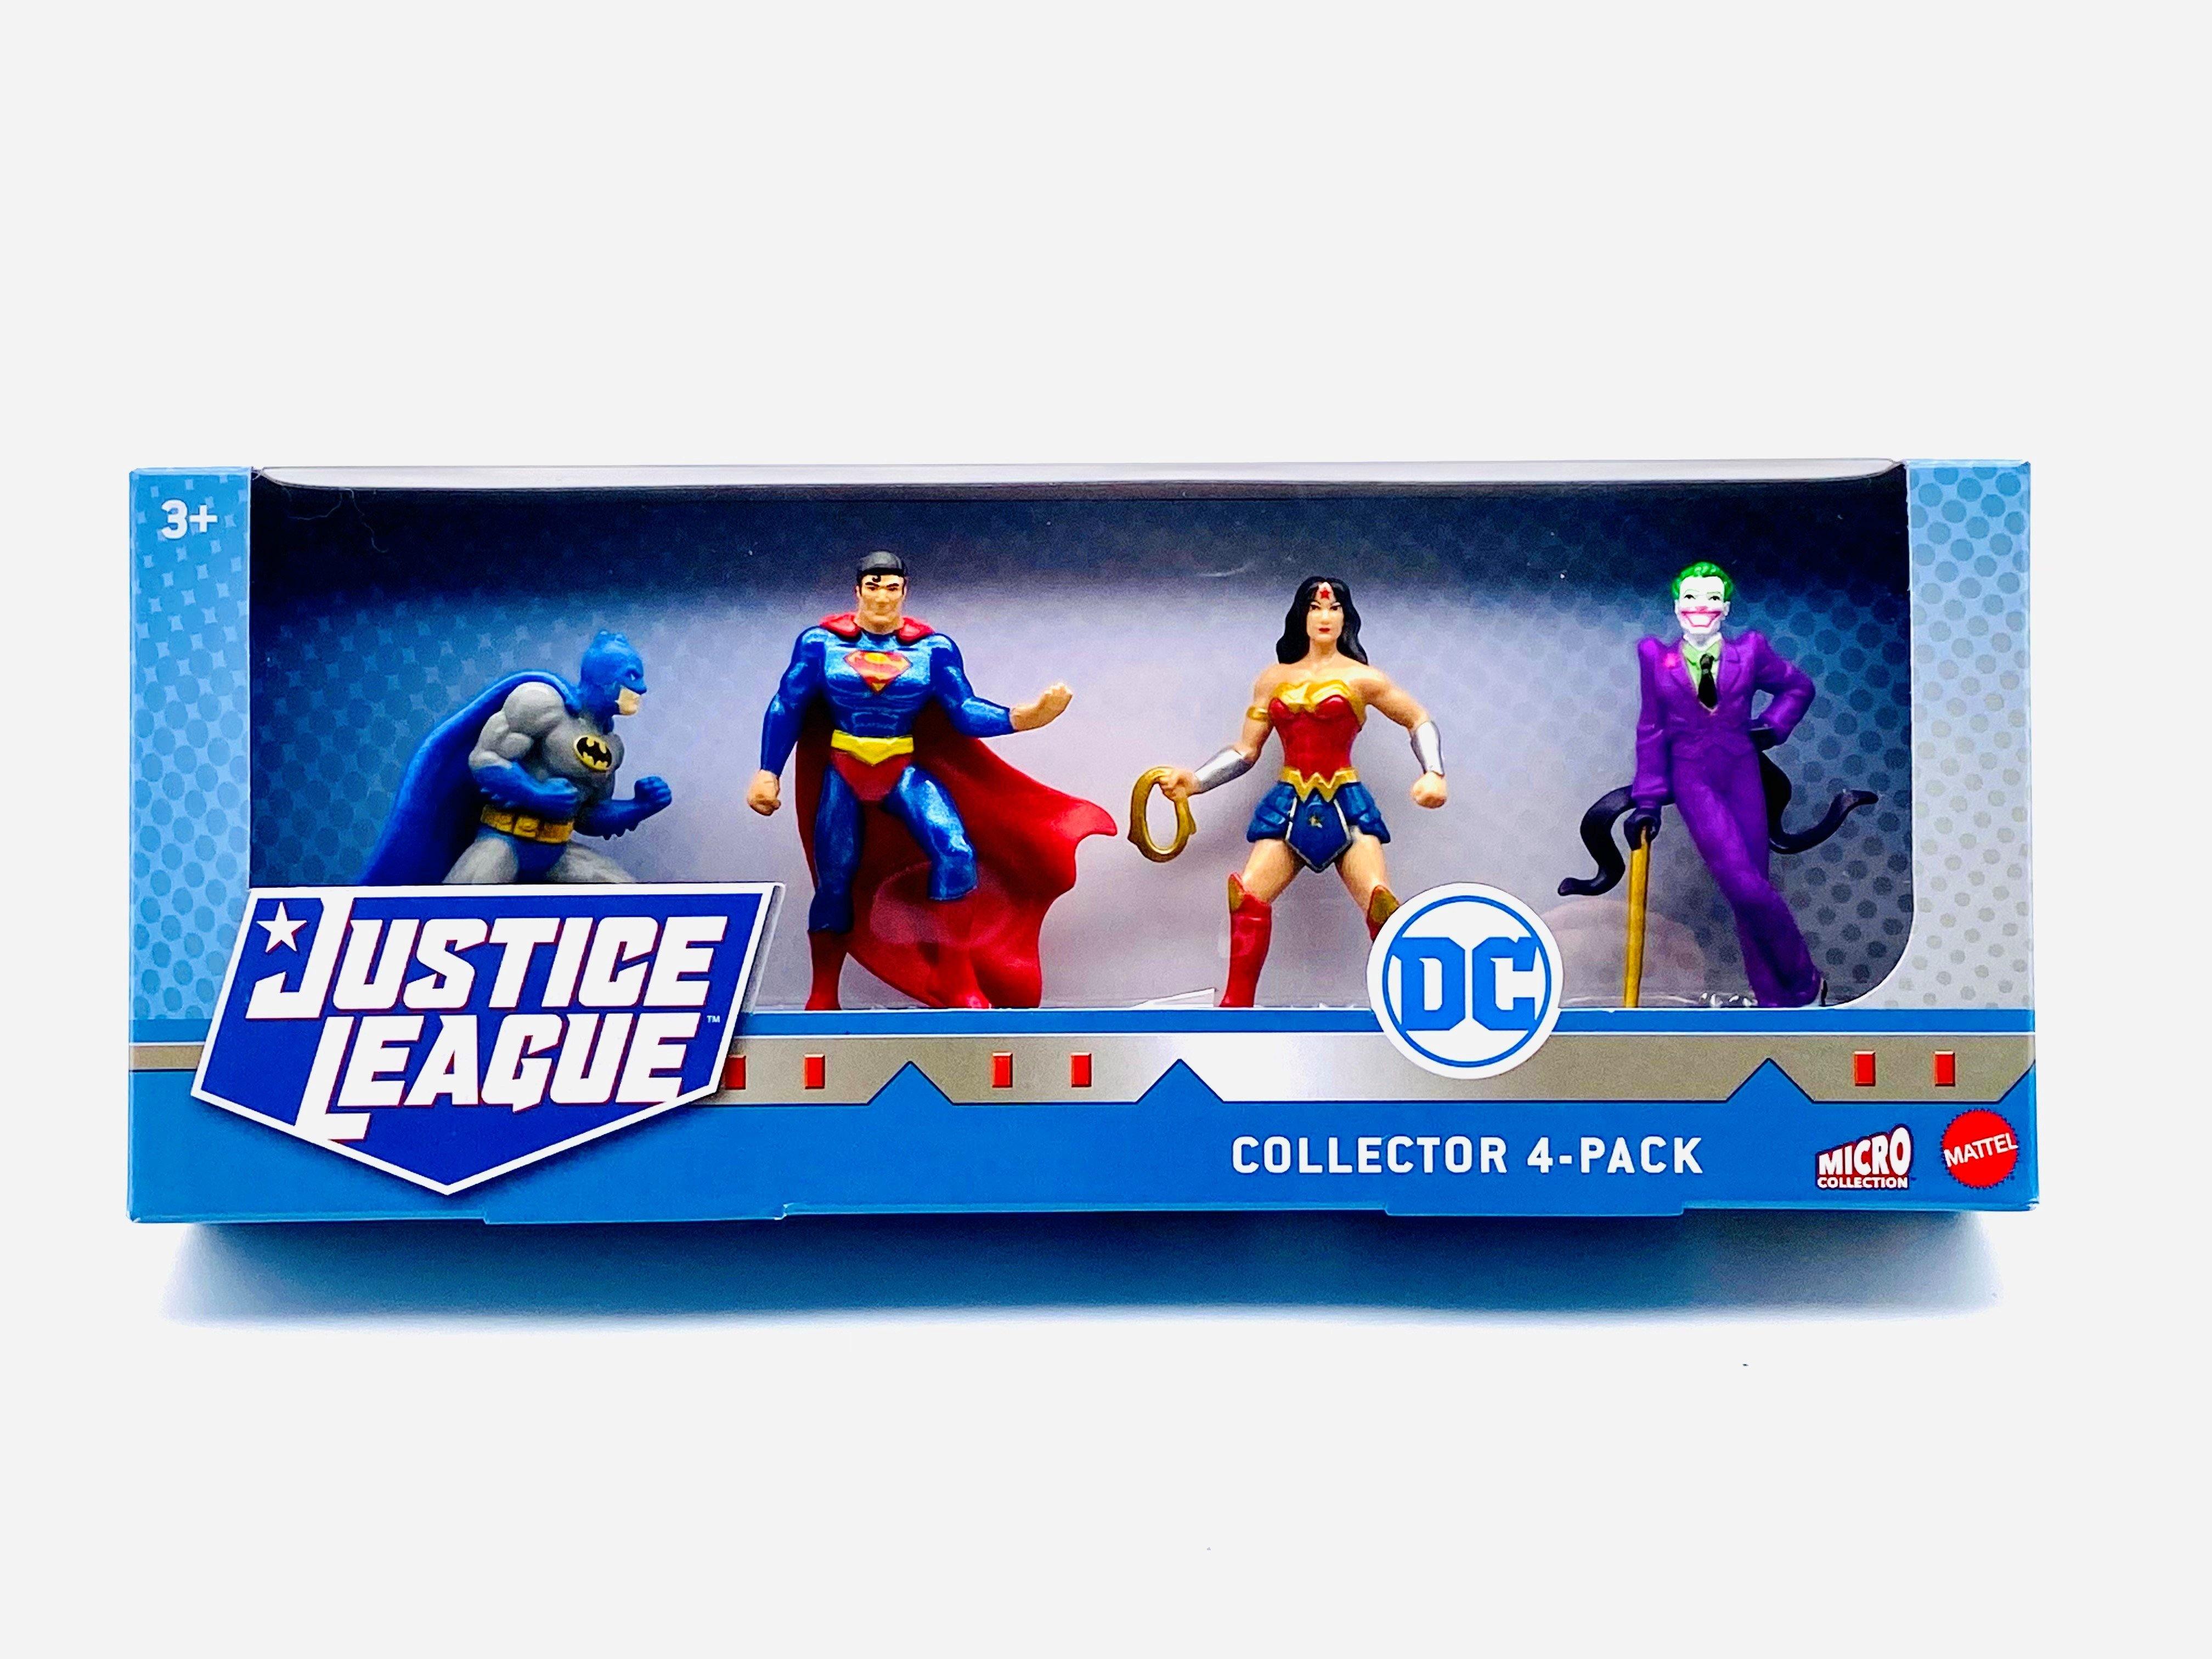 DC Justice League Micro Collection 4-Pack Figures